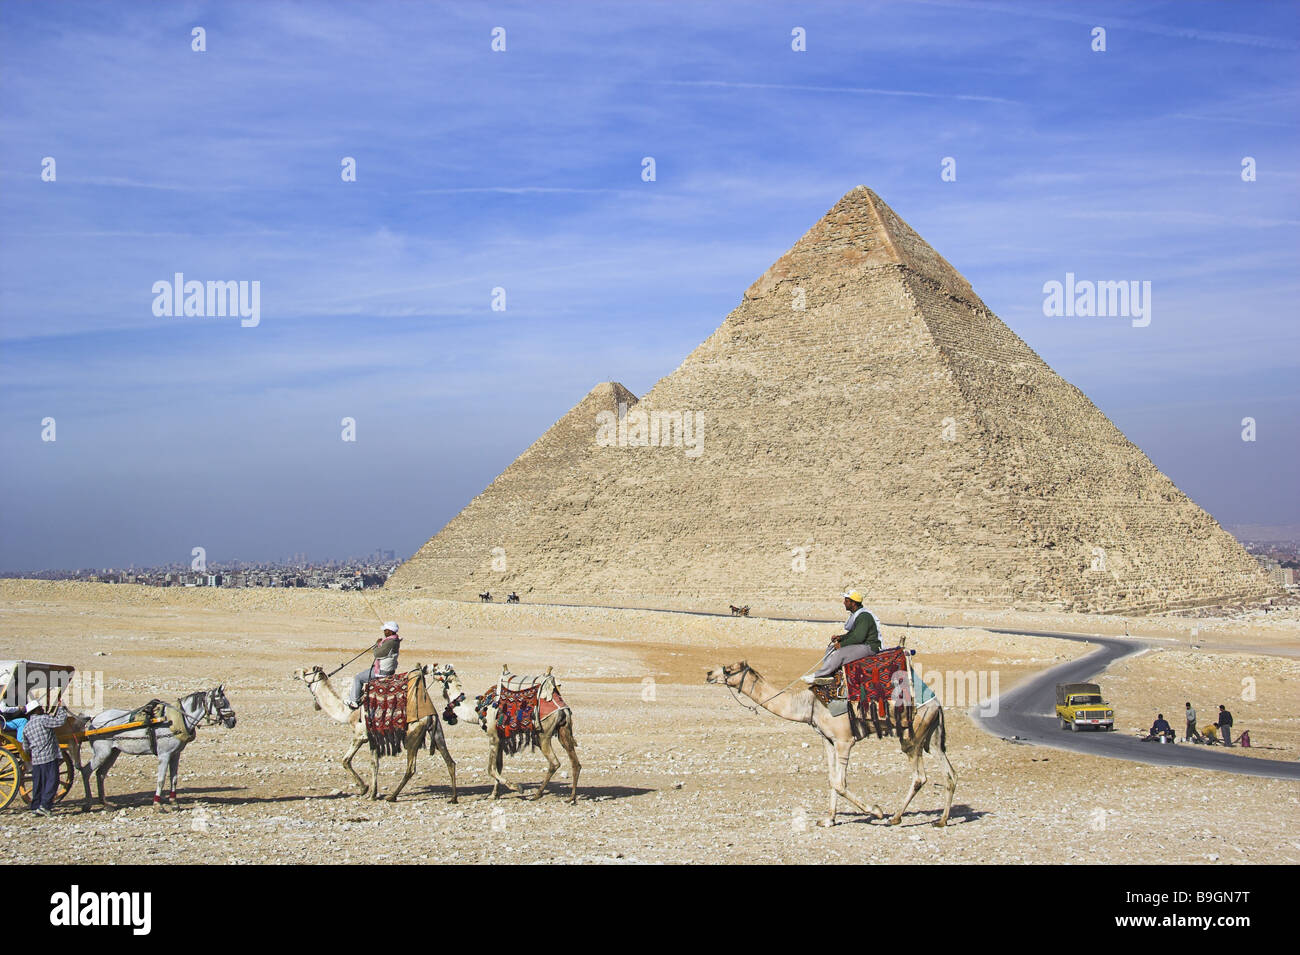 Egypt Cairo Giseh pyramids rding a camel Antiquity architecture trip destination style constructions sightseeing boss-reintag Stock Photo